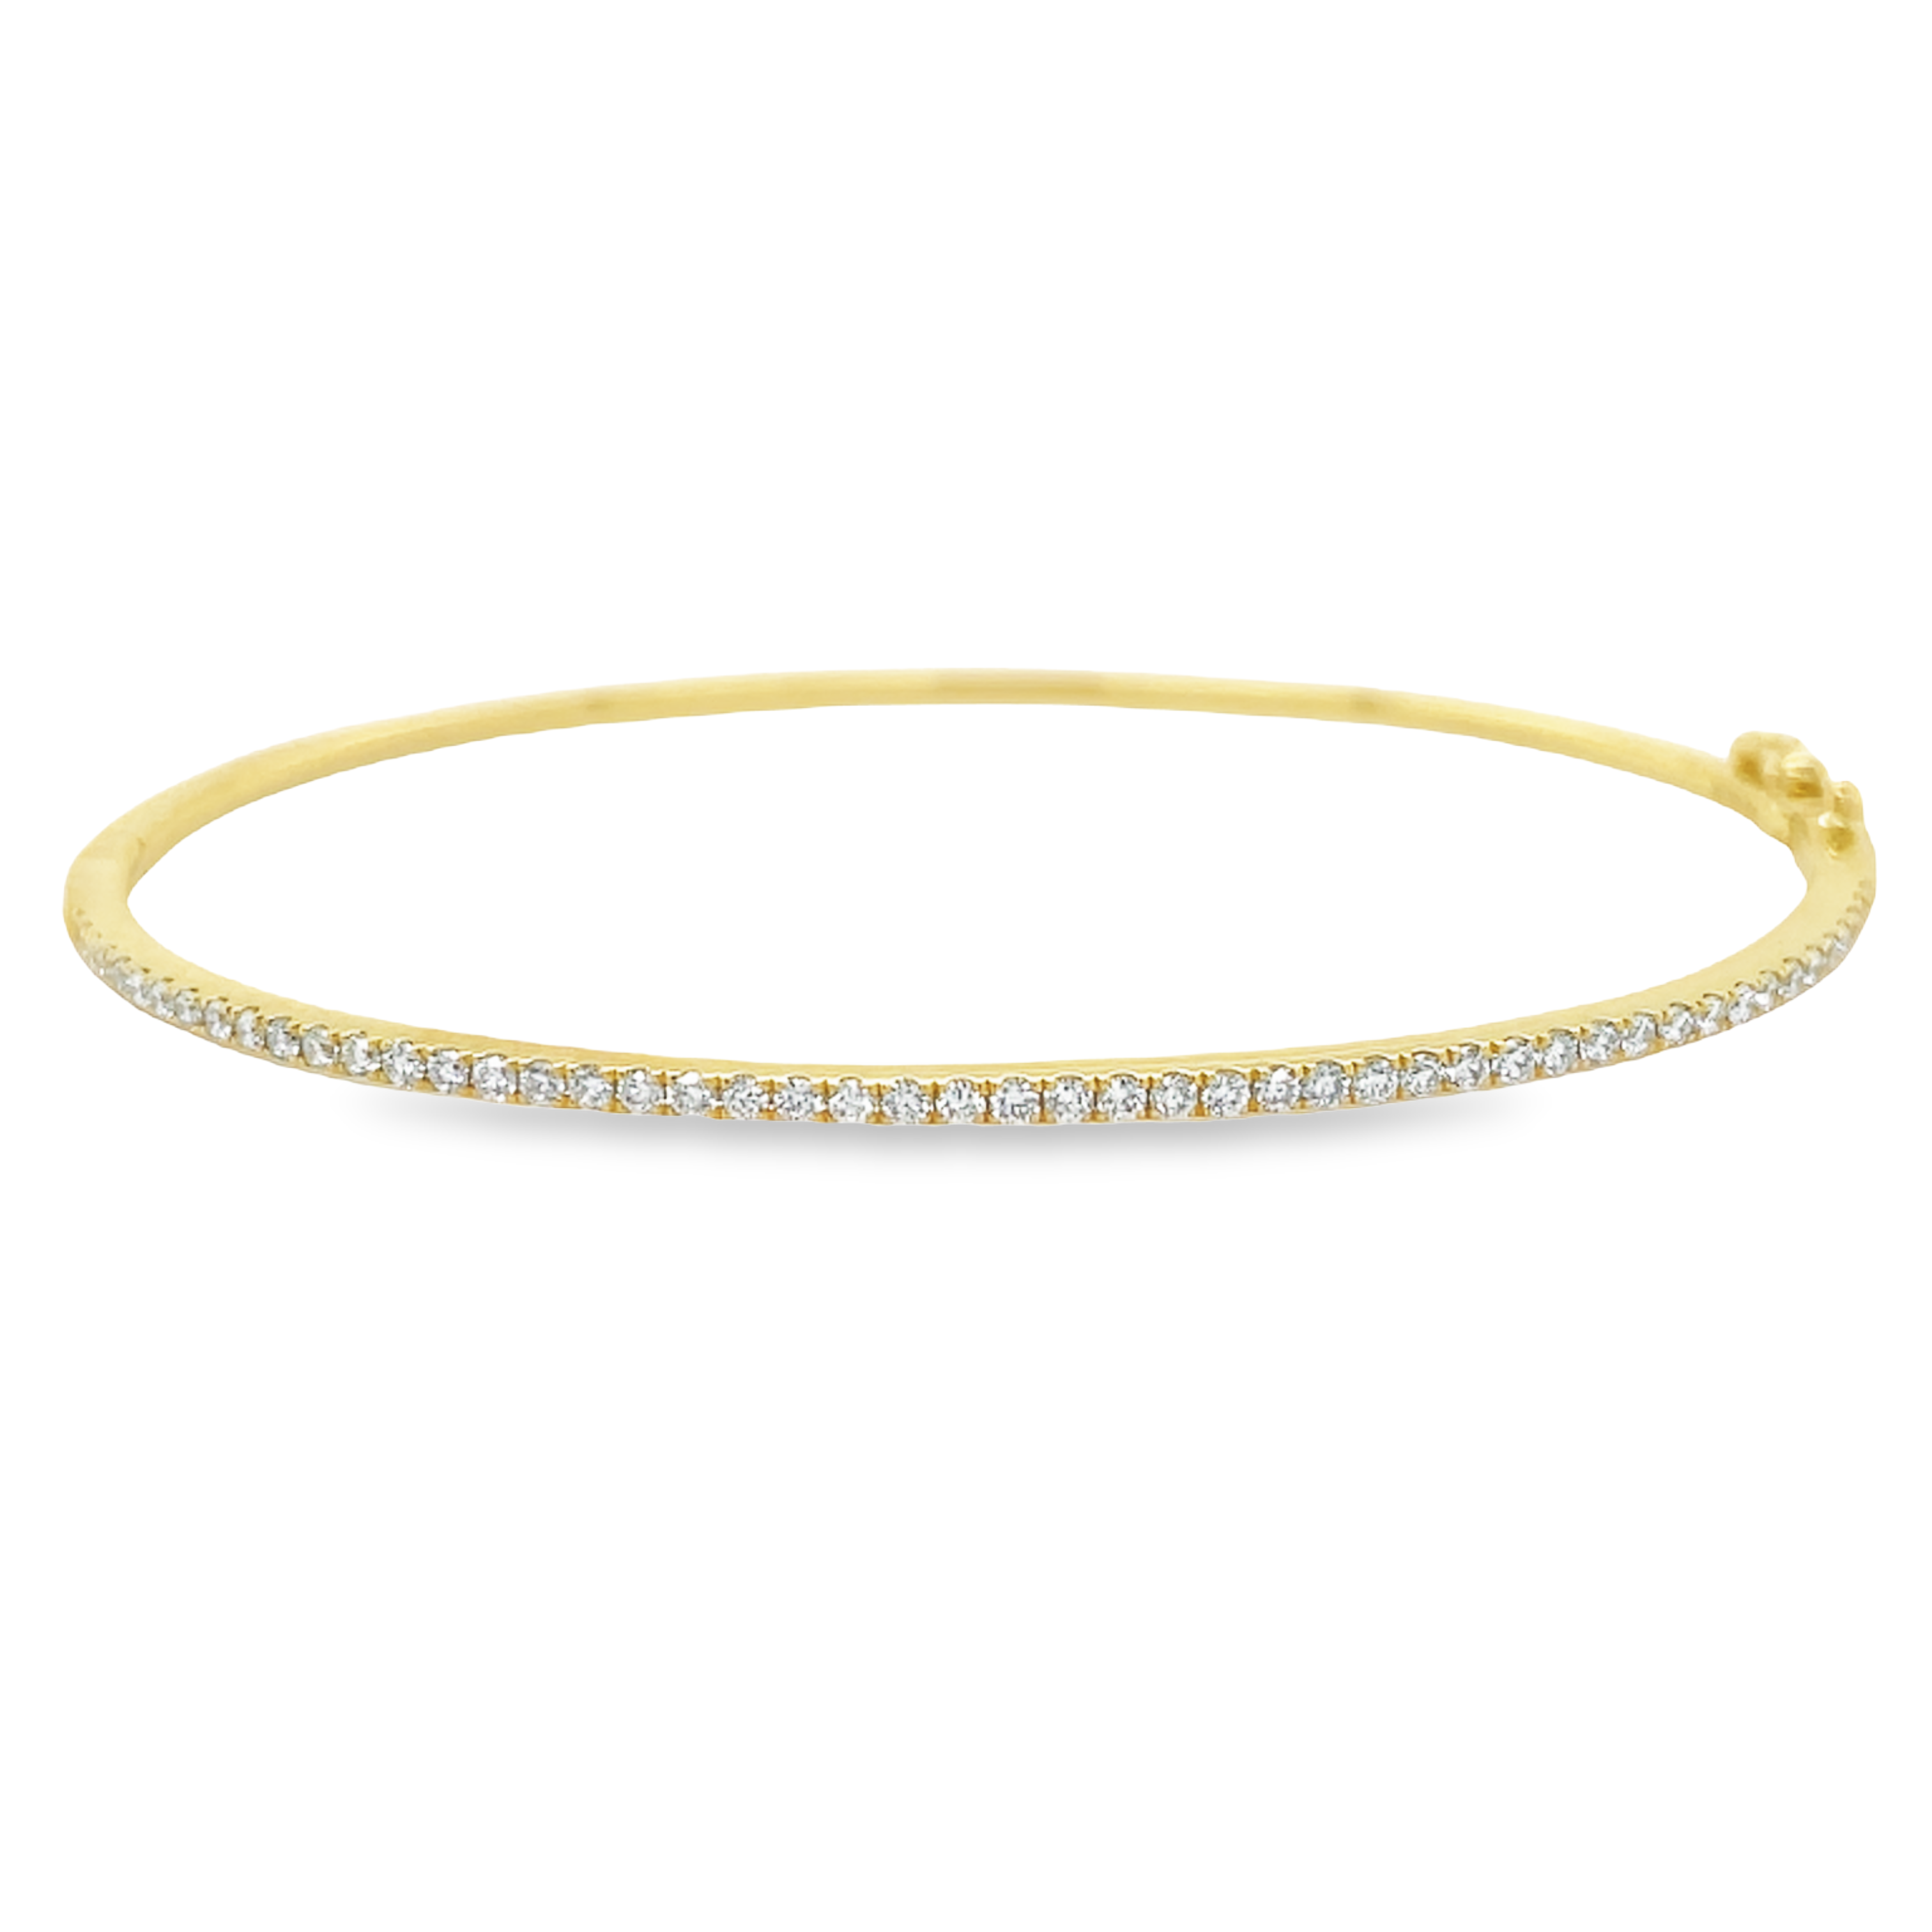 This luxurious dainty bangle bracelet crafted in 18K yellow gold is set with 0.48 carats of round diamonds. It is the perfect accessory to add a great sparkle to any ensemble or stack multiple for a bolder look.  F/G color  Hinge system  Secure fig 8  Prong setting 